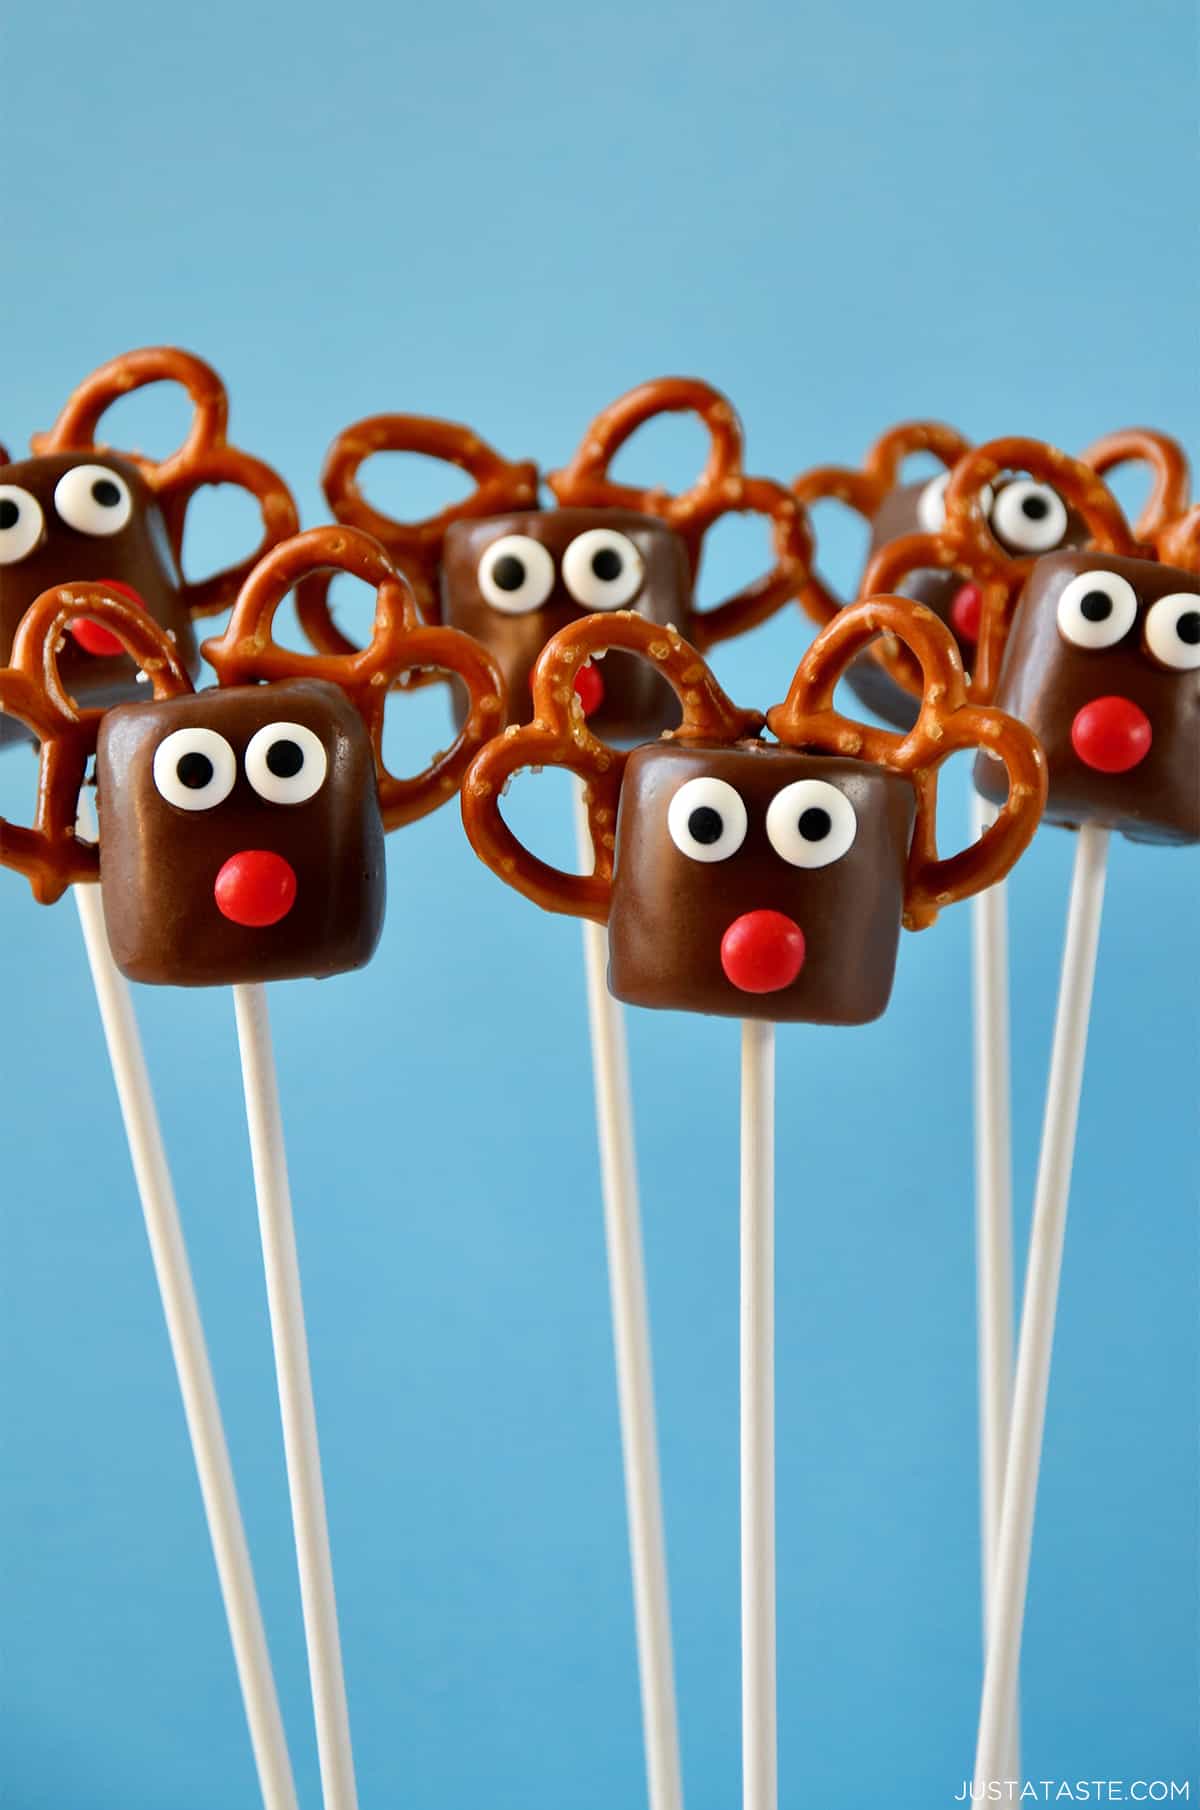 Chocolate-covered marshmallows with candy eyes, red candy noses and pretzel "antlers" made to look like Santa's reindeer.